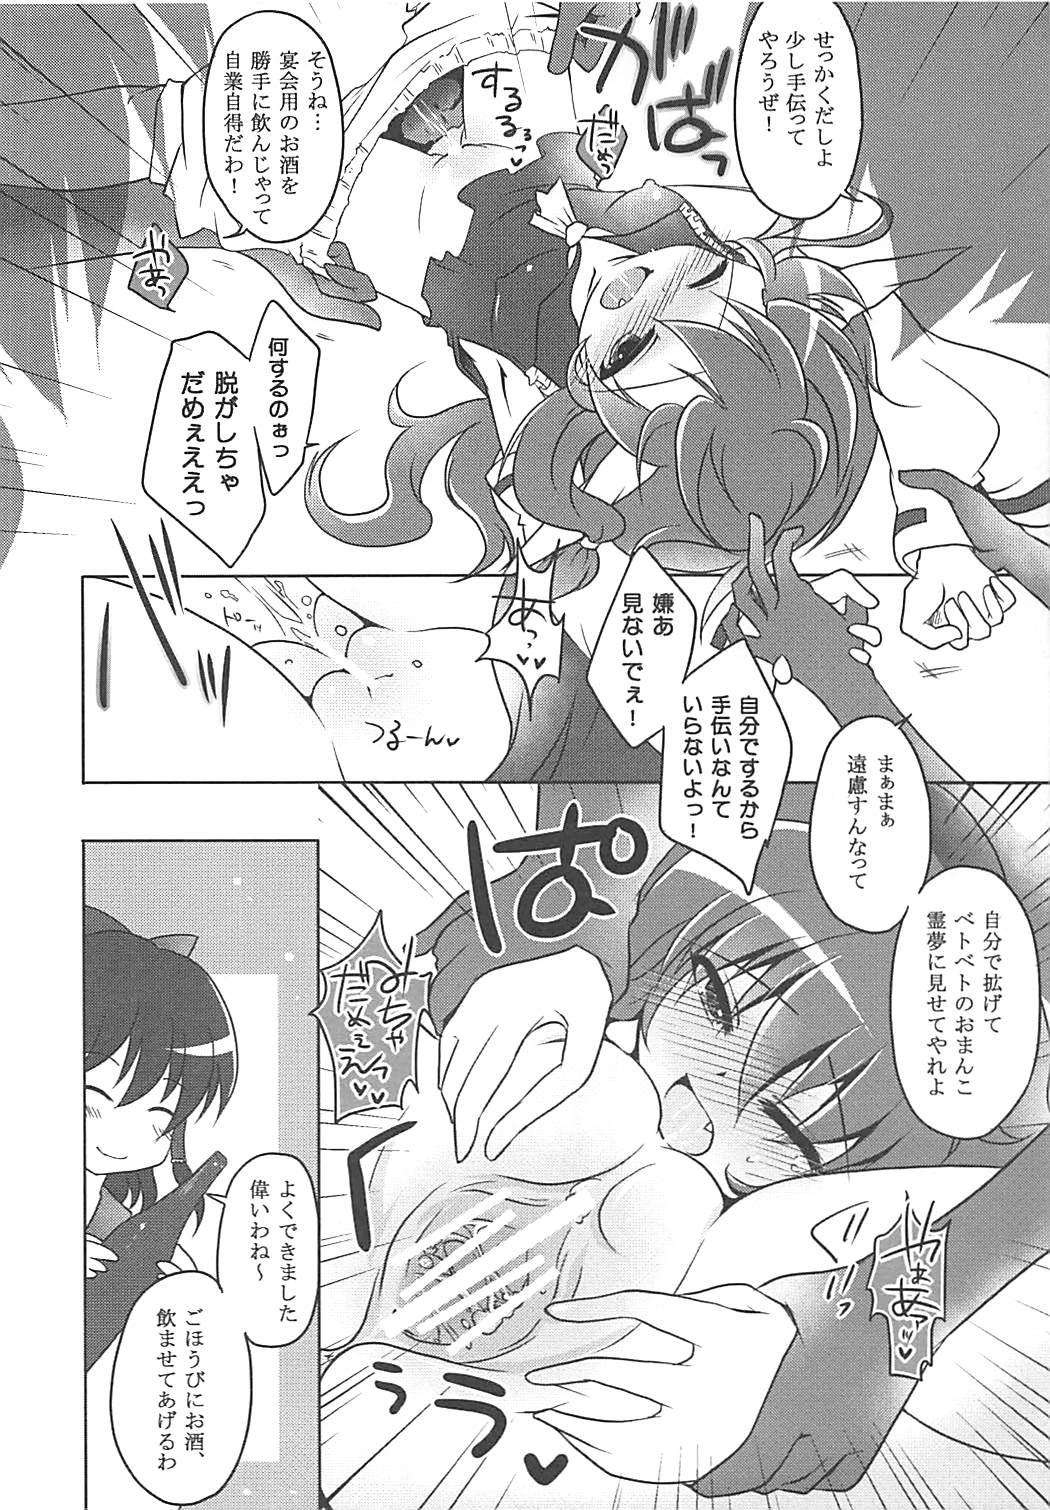 Soloboy Suimiko Suika. - Touhou project Amazing - Page 7